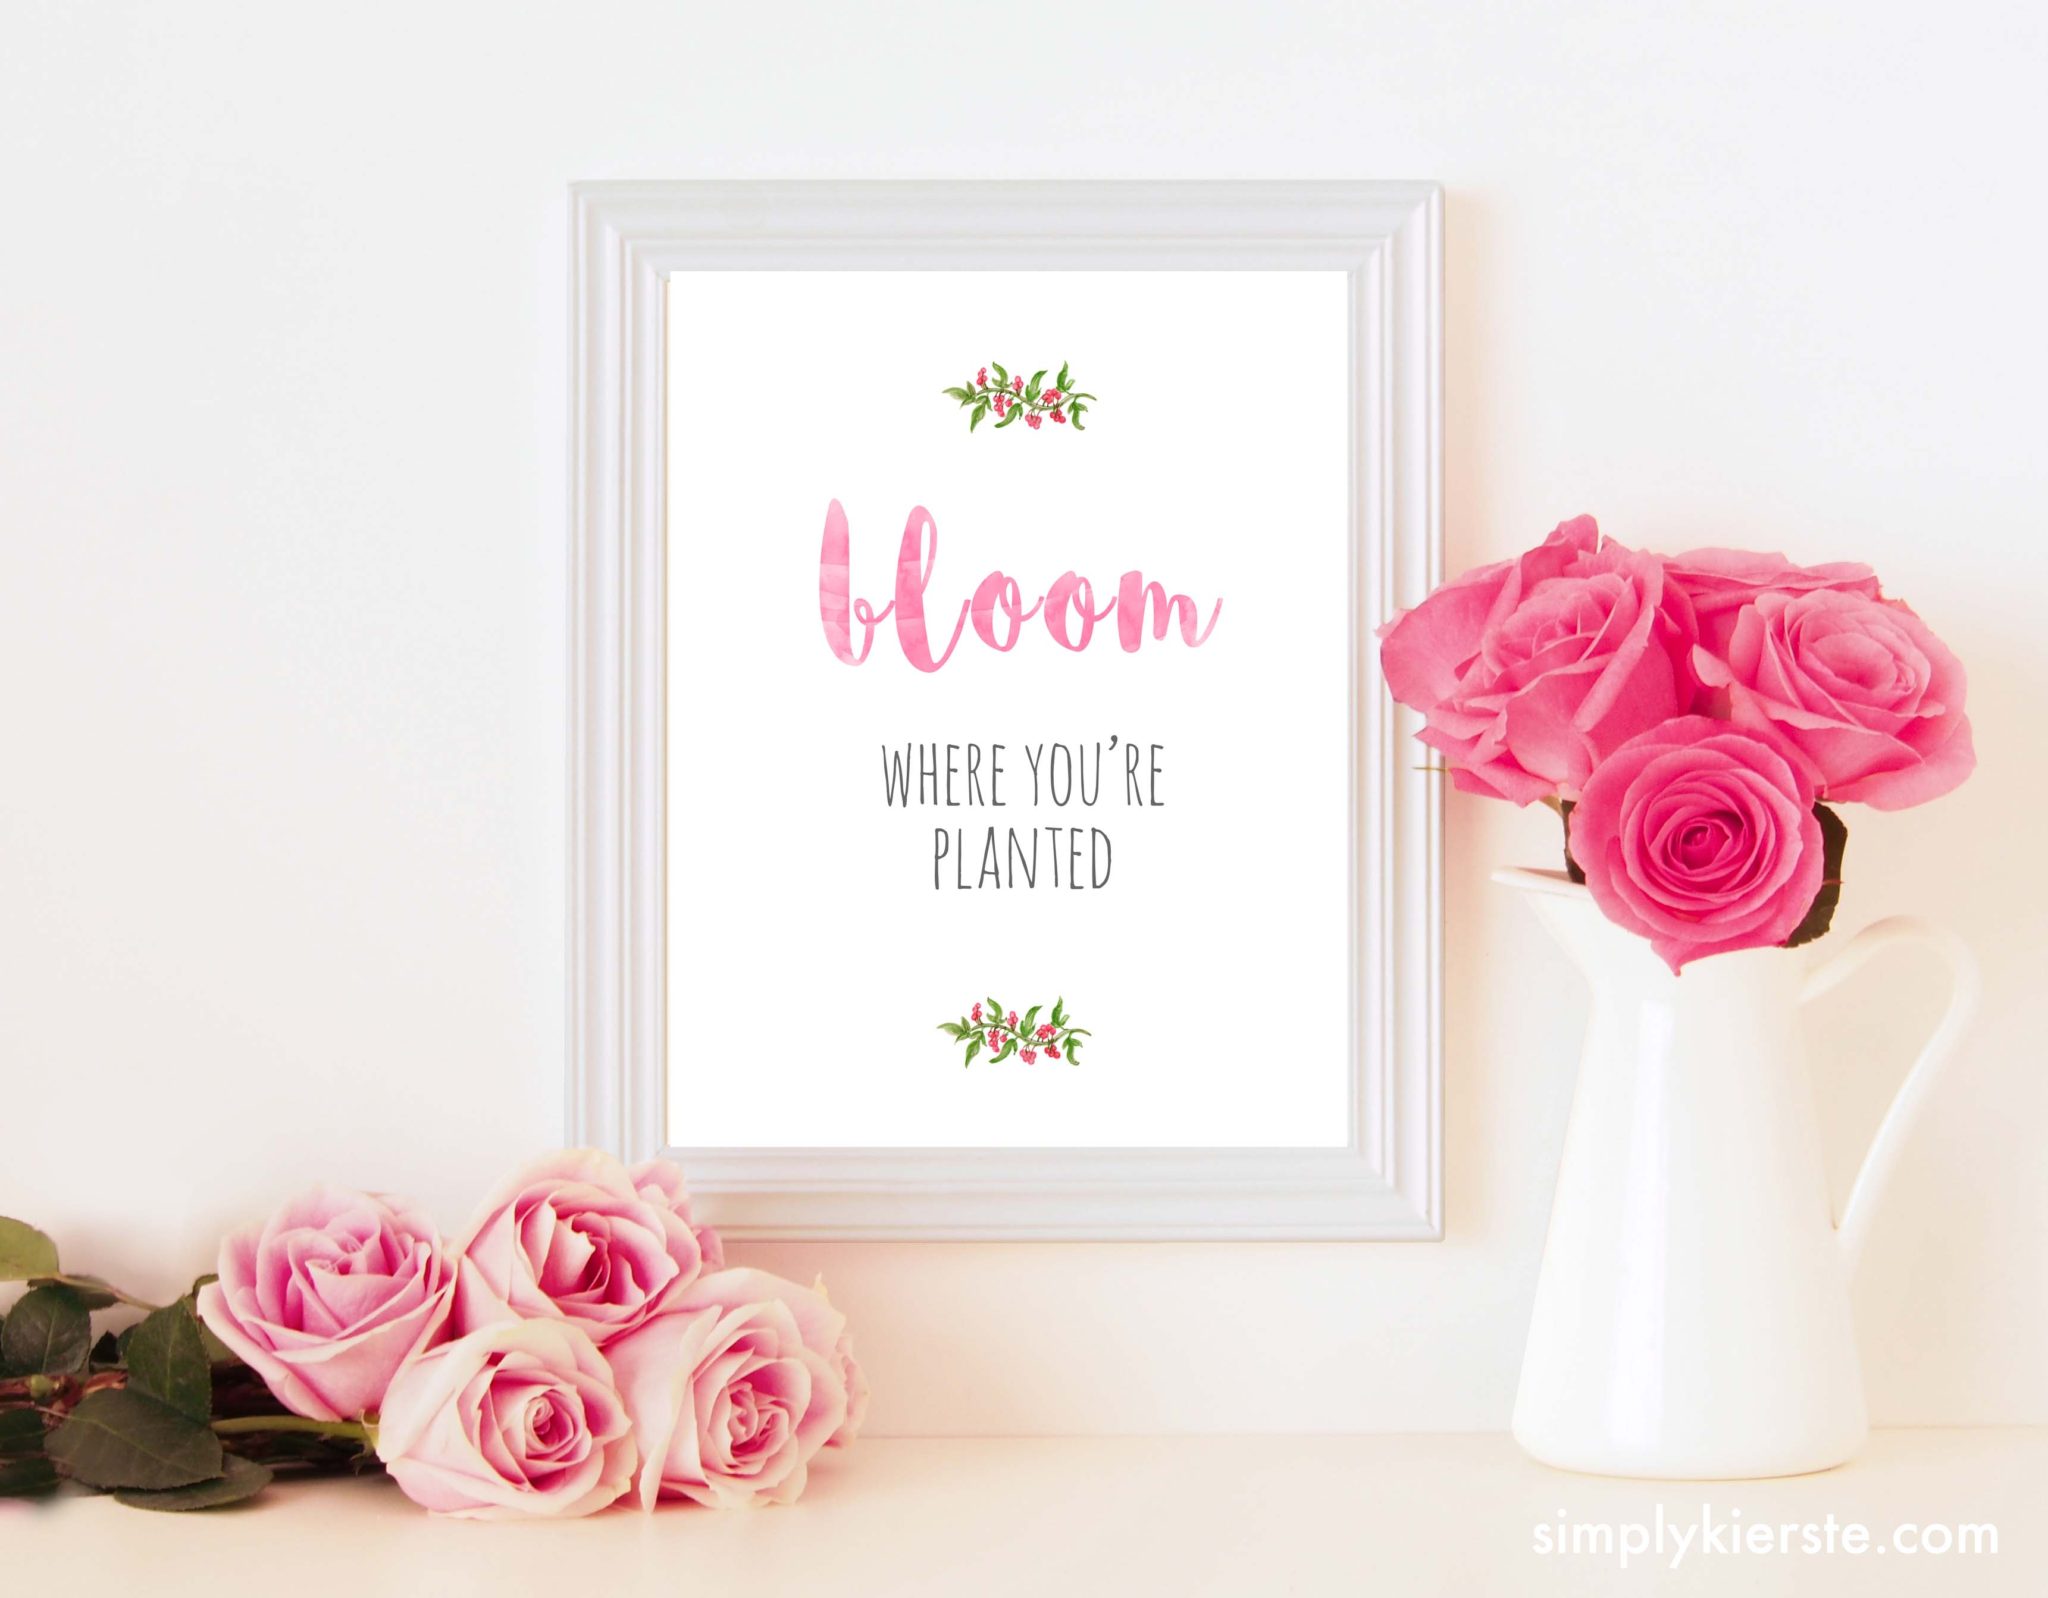 Bloom Where You're Planted Prints For Your Home | Simply Kierste2048 x 1598